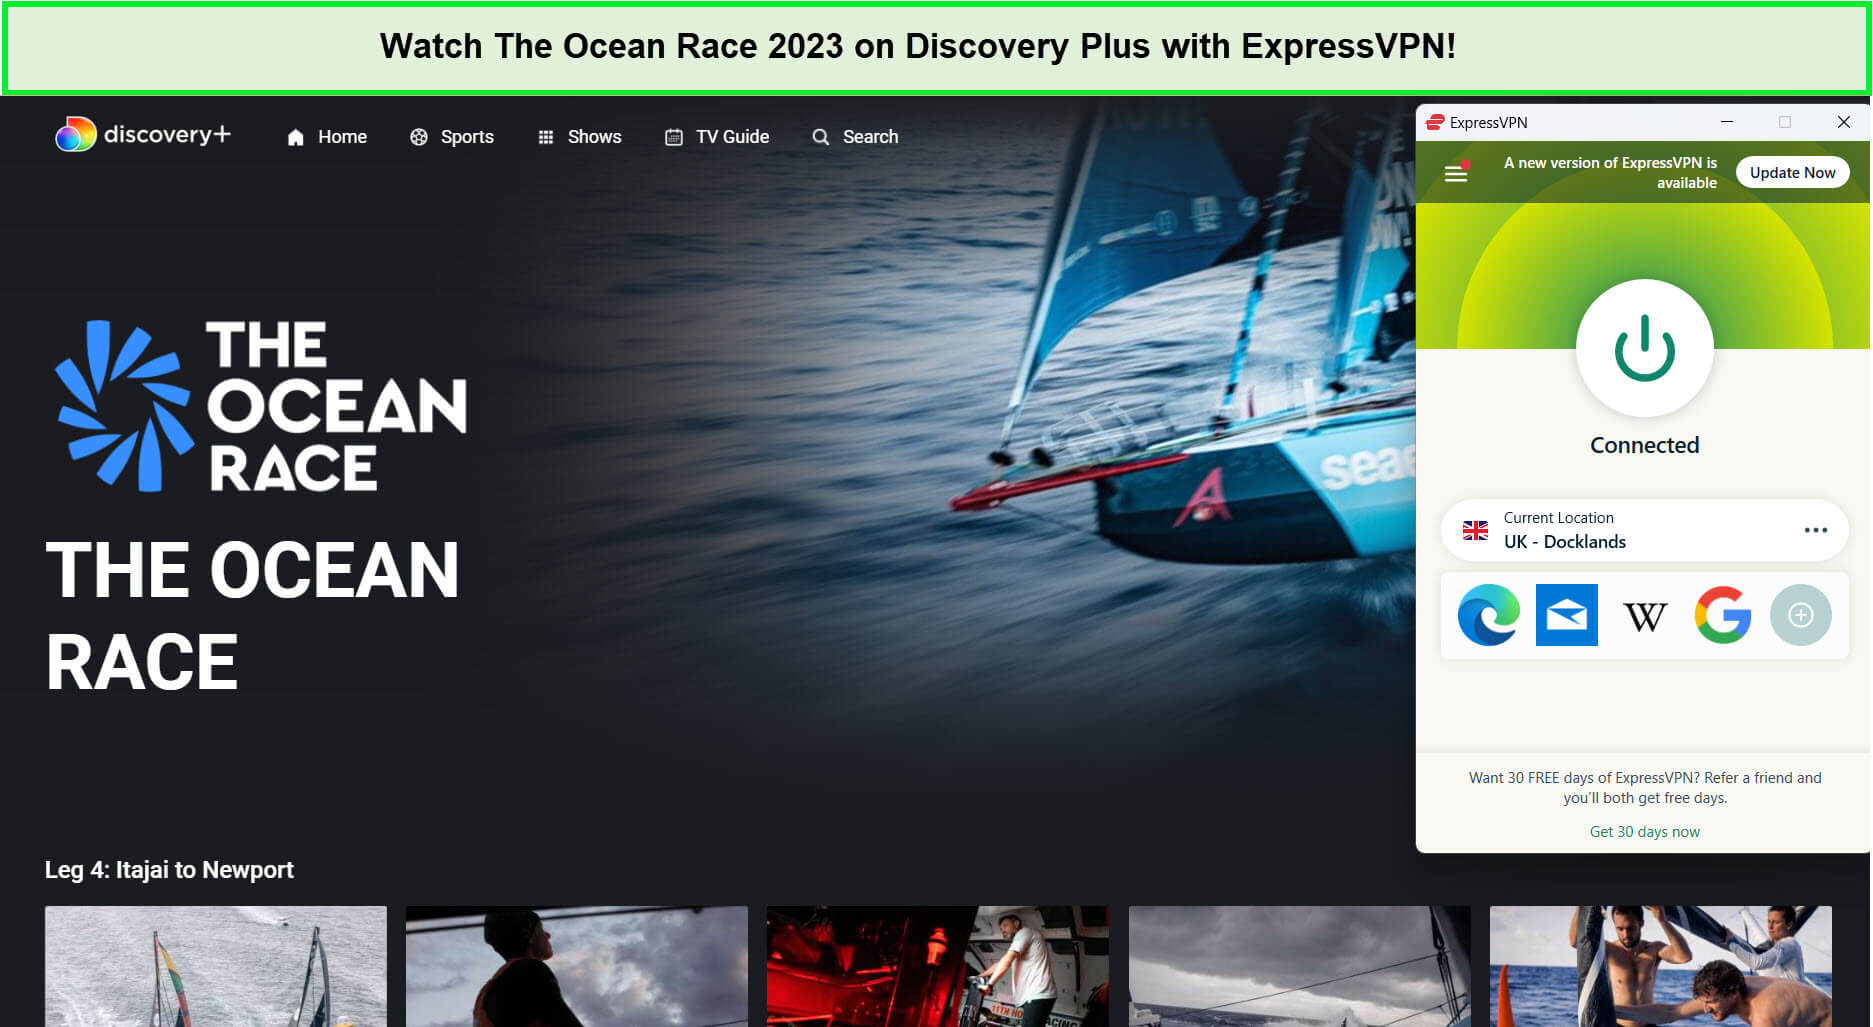 expressvpn-unblocks-the-ocean-race-2023-live-in-UAE-on-discovery-plus